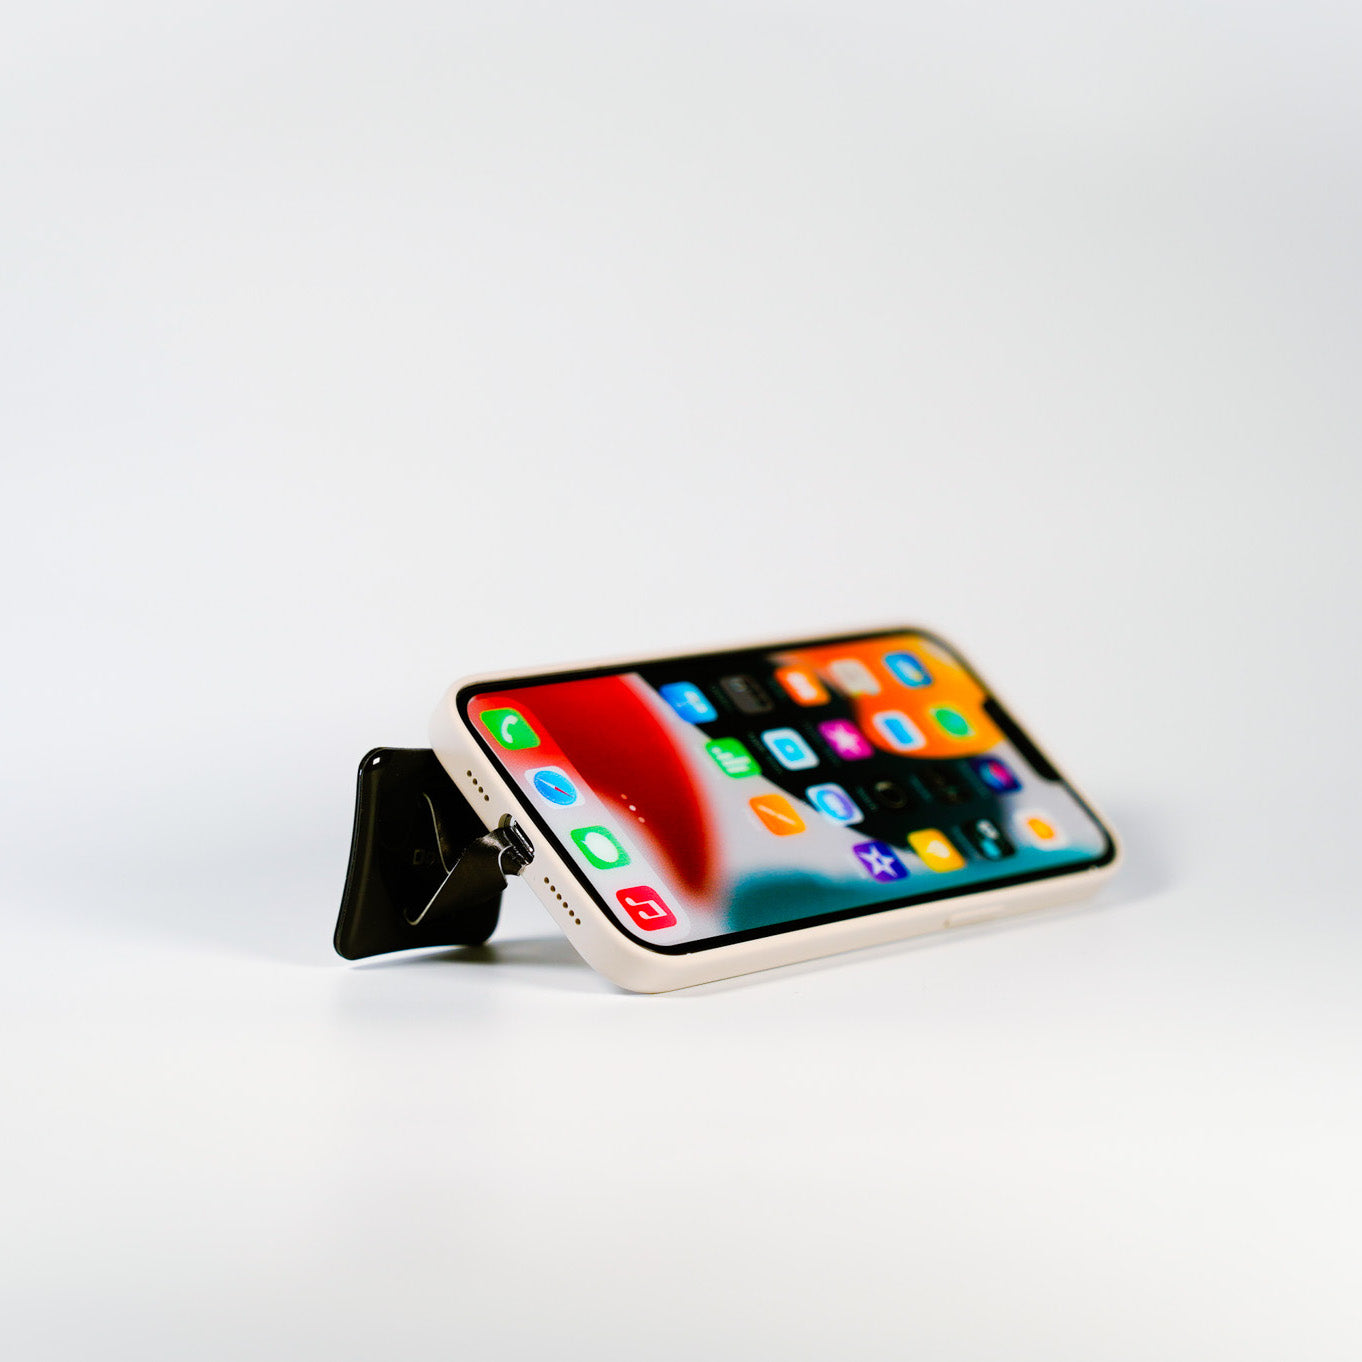 SYANTO Stand smartphone stand ring